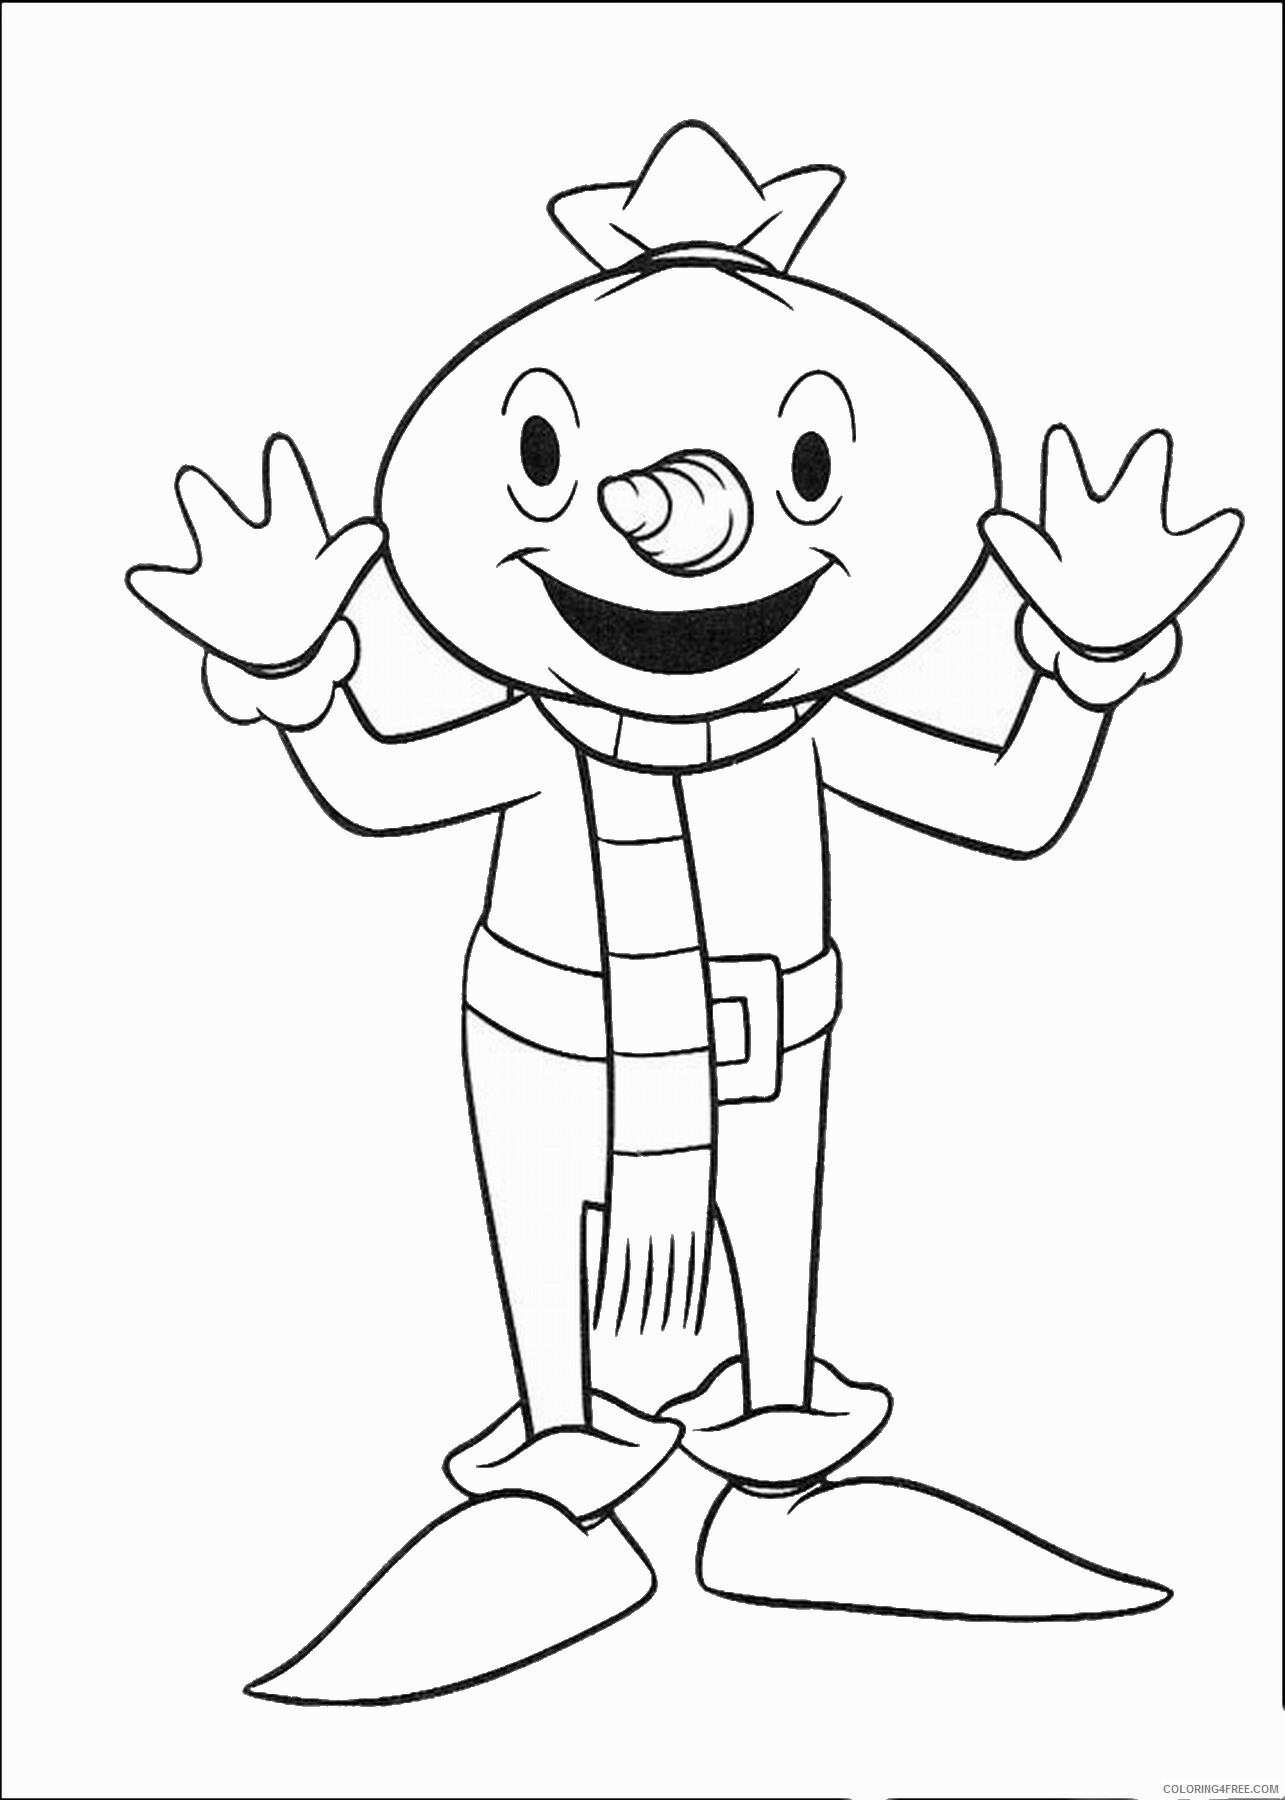 Bob the Builder Coloring Pages TV Film bob the builder_21 Printable 2020 00971 Coloring4free